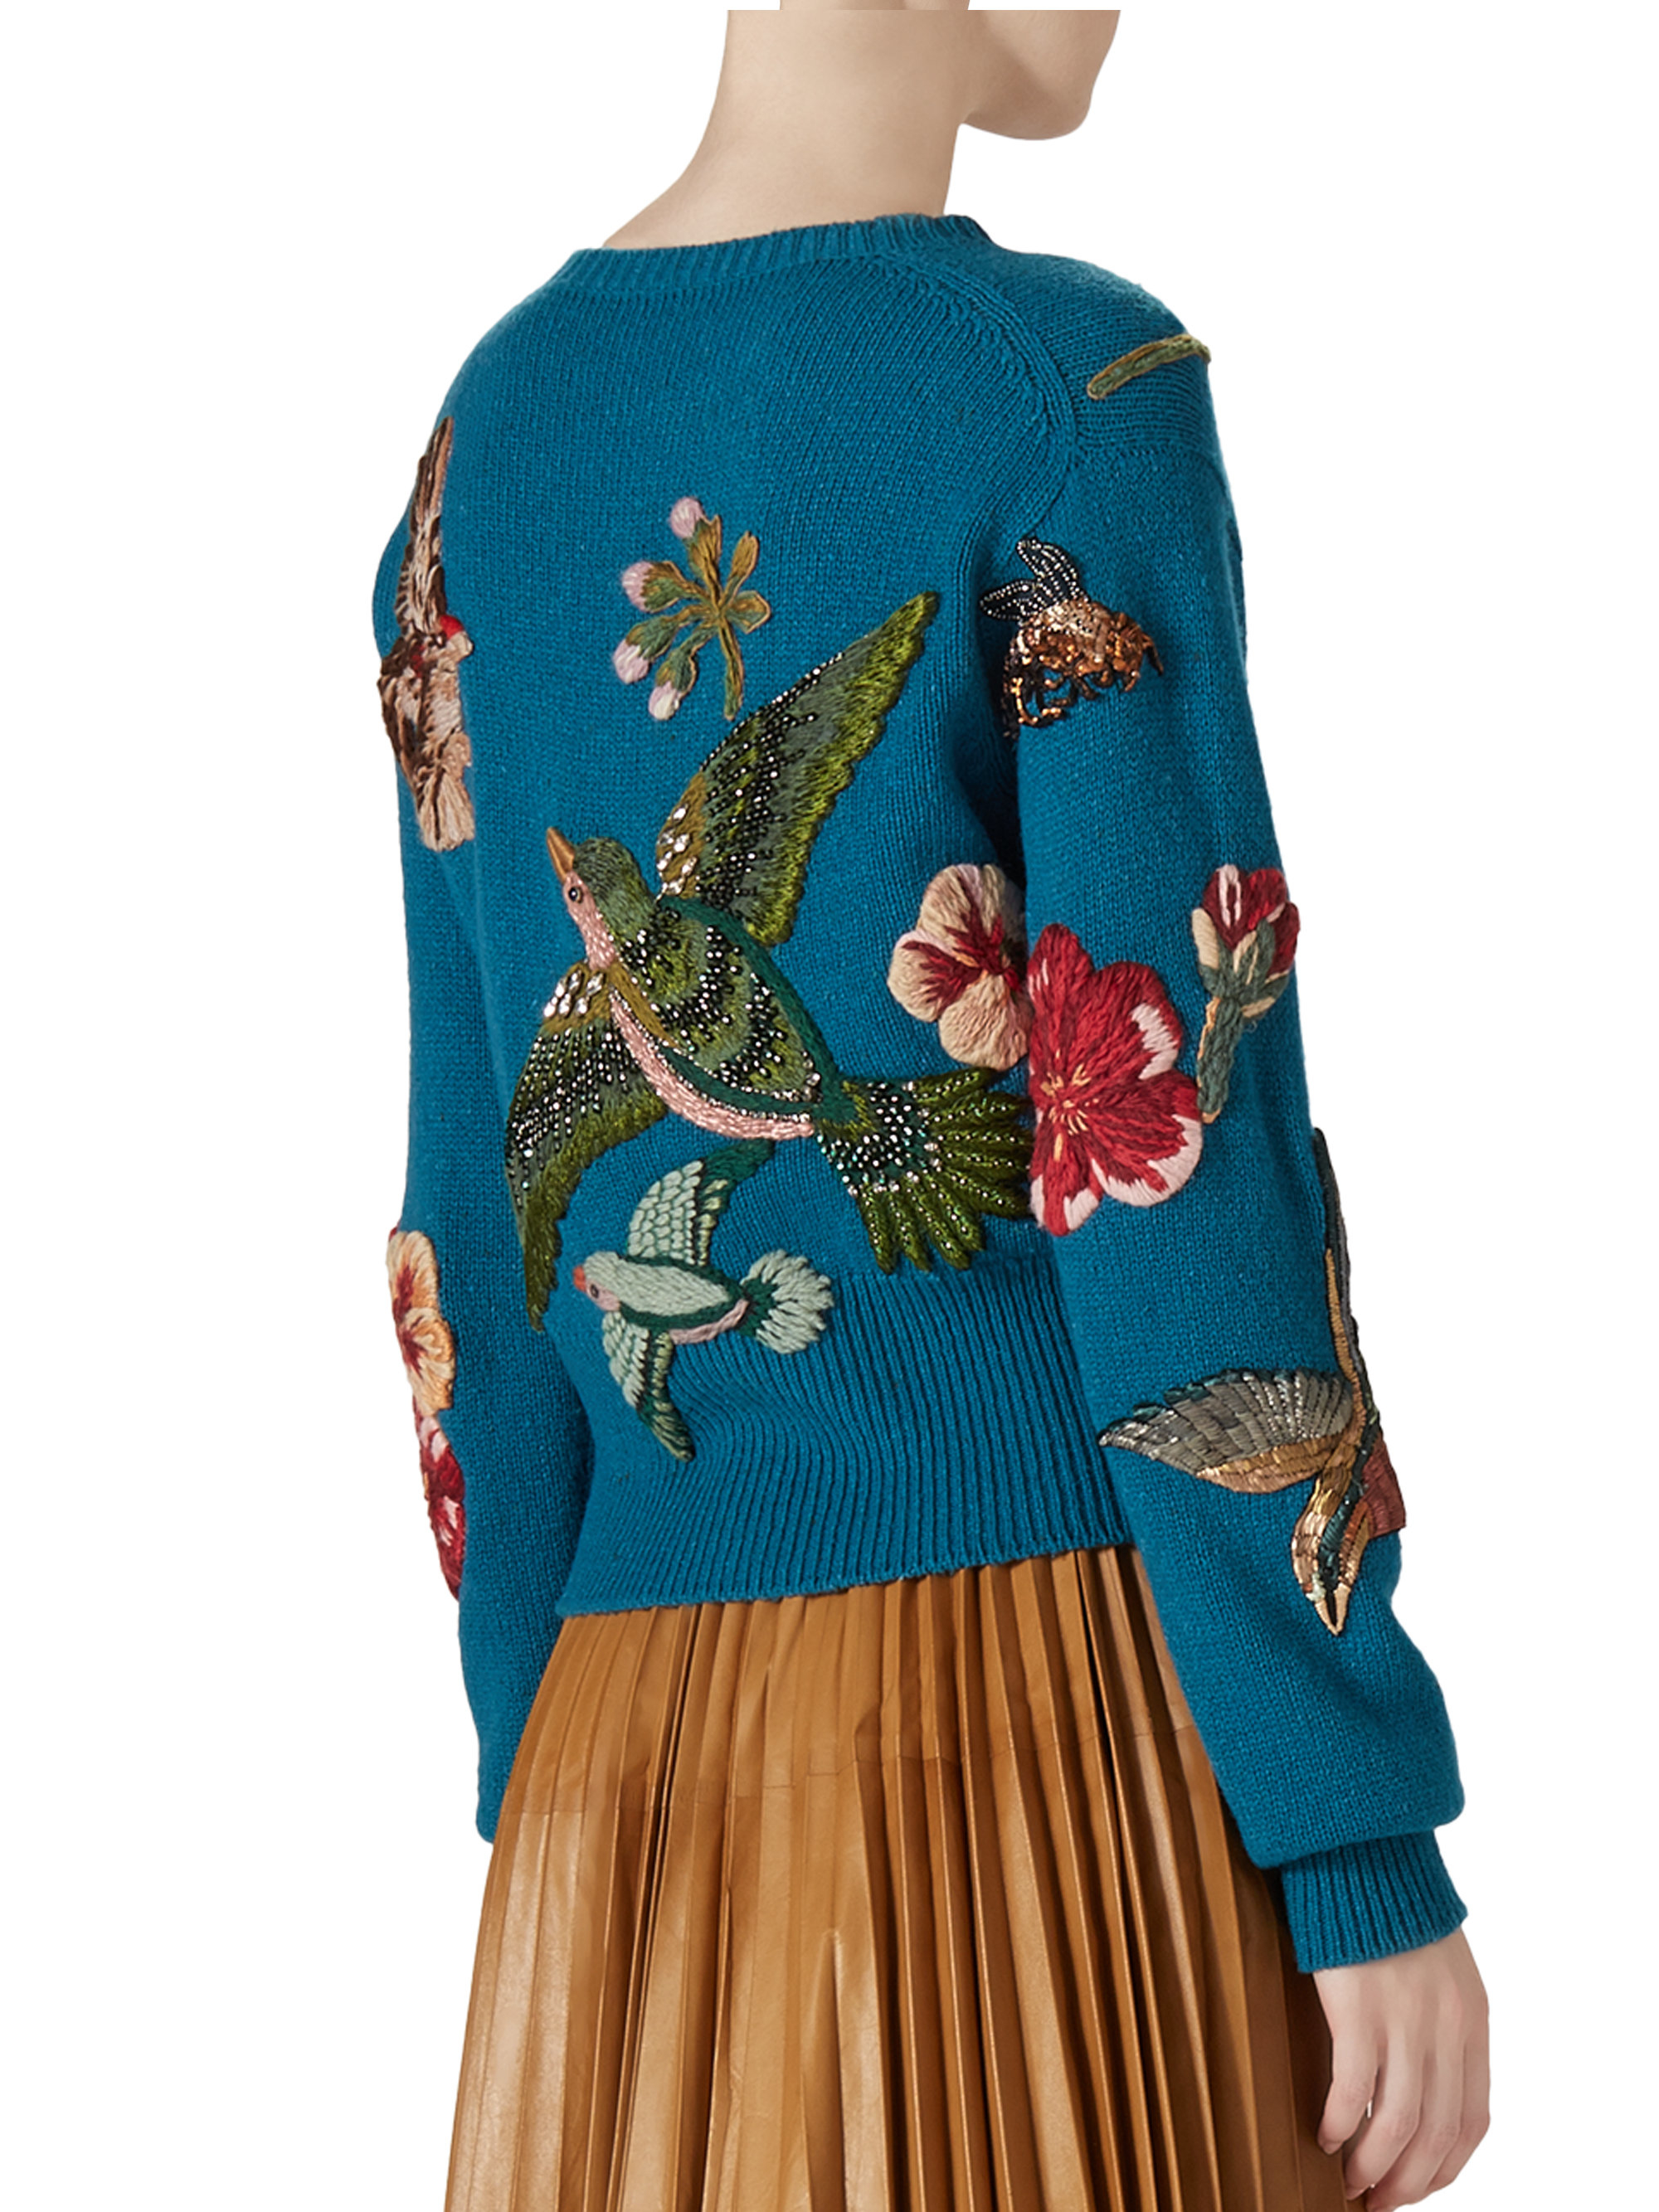 Undskyld mig benzin bag Gucci Embroidered Wool Knit Top in Blue - Lyst